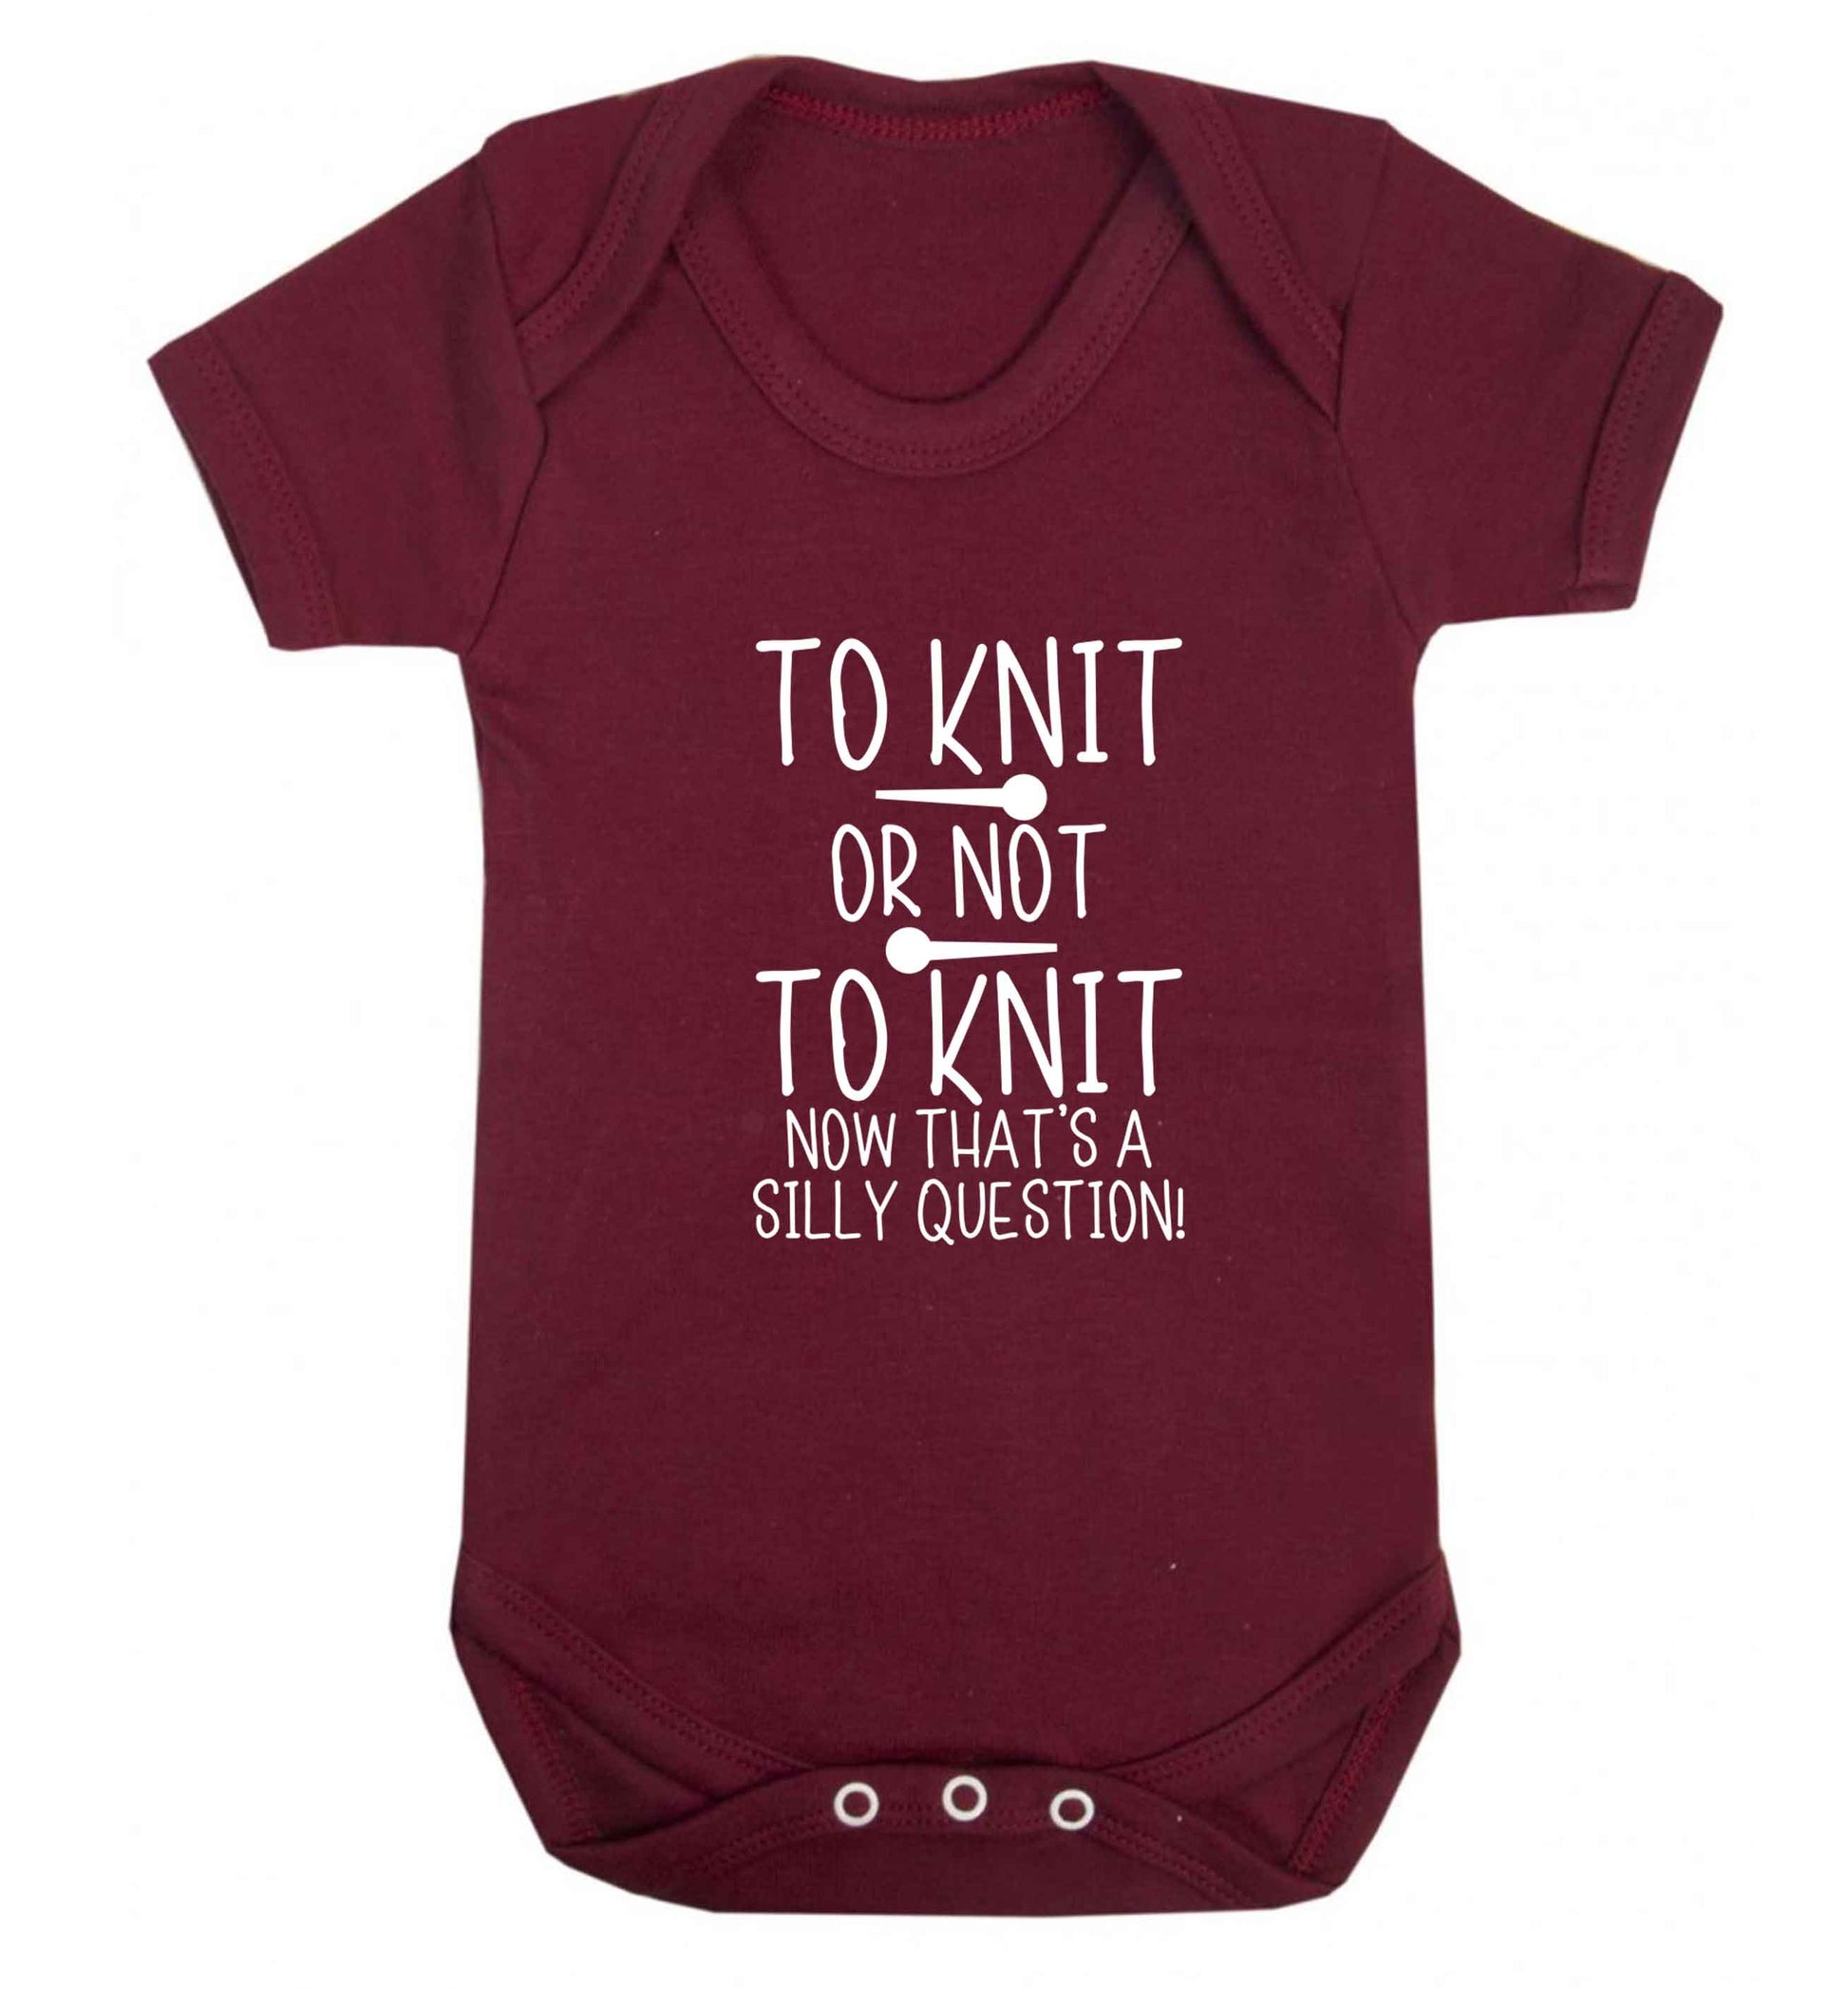 To knit or not to knit now that's a silly question baby vest maroon 18-24 months